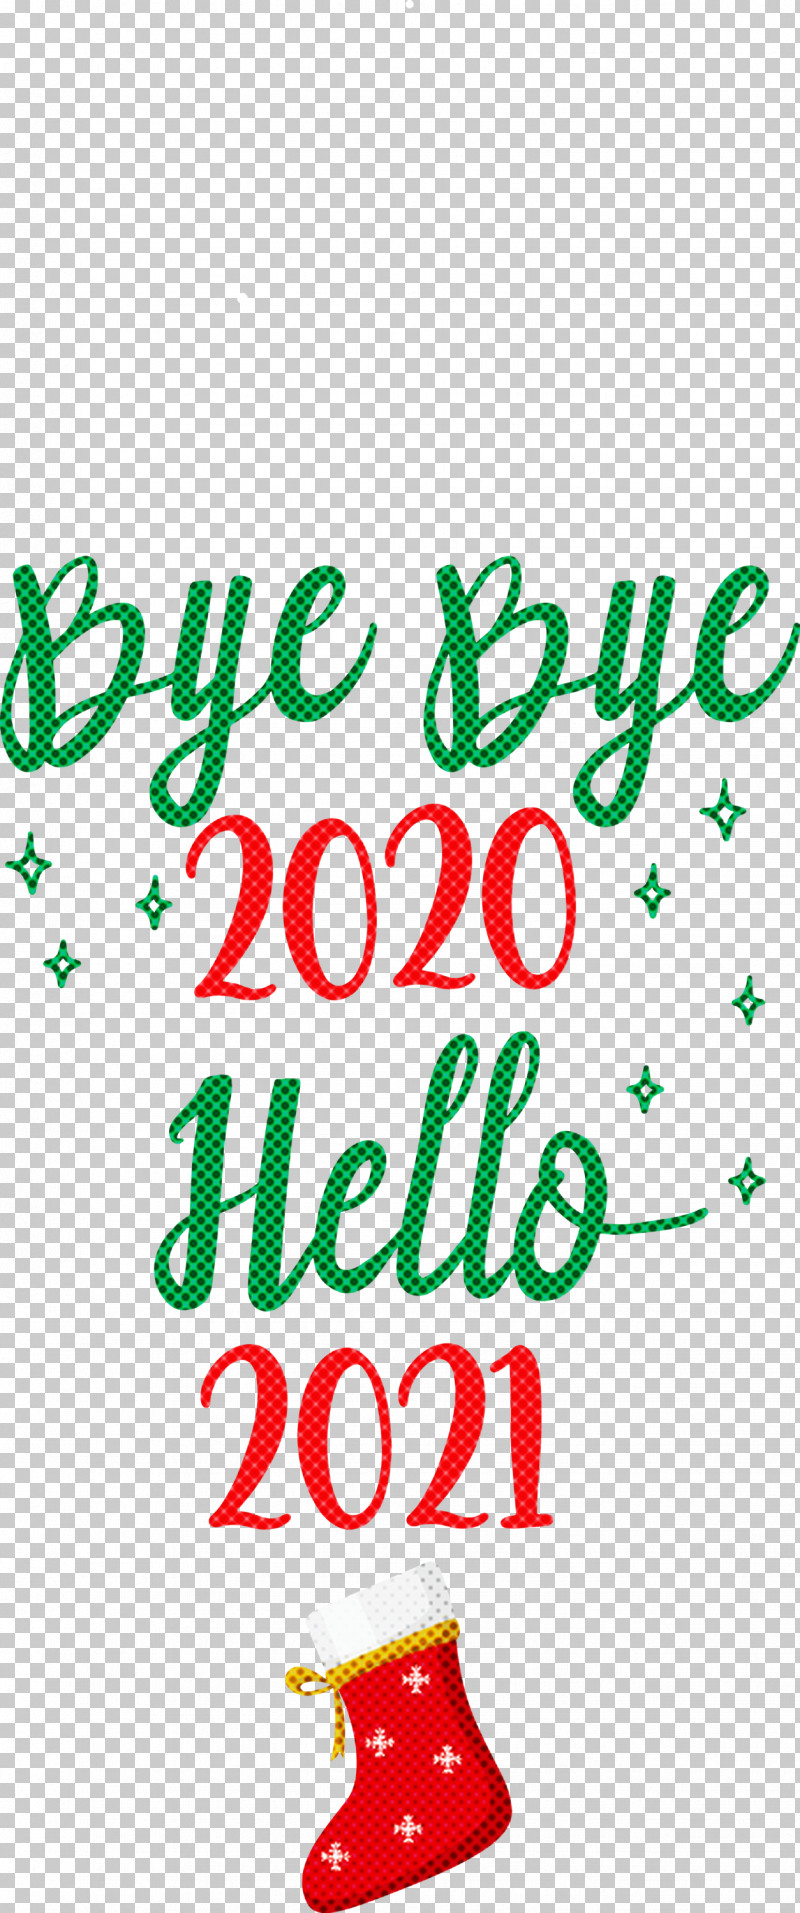 Hello 2021 Year Bye Bye 2020 Year PNG, Clipart, Bye Bye 2020 Year, Creativity, Geometry, Happiness, Hello 2021 Year Free PNG Download